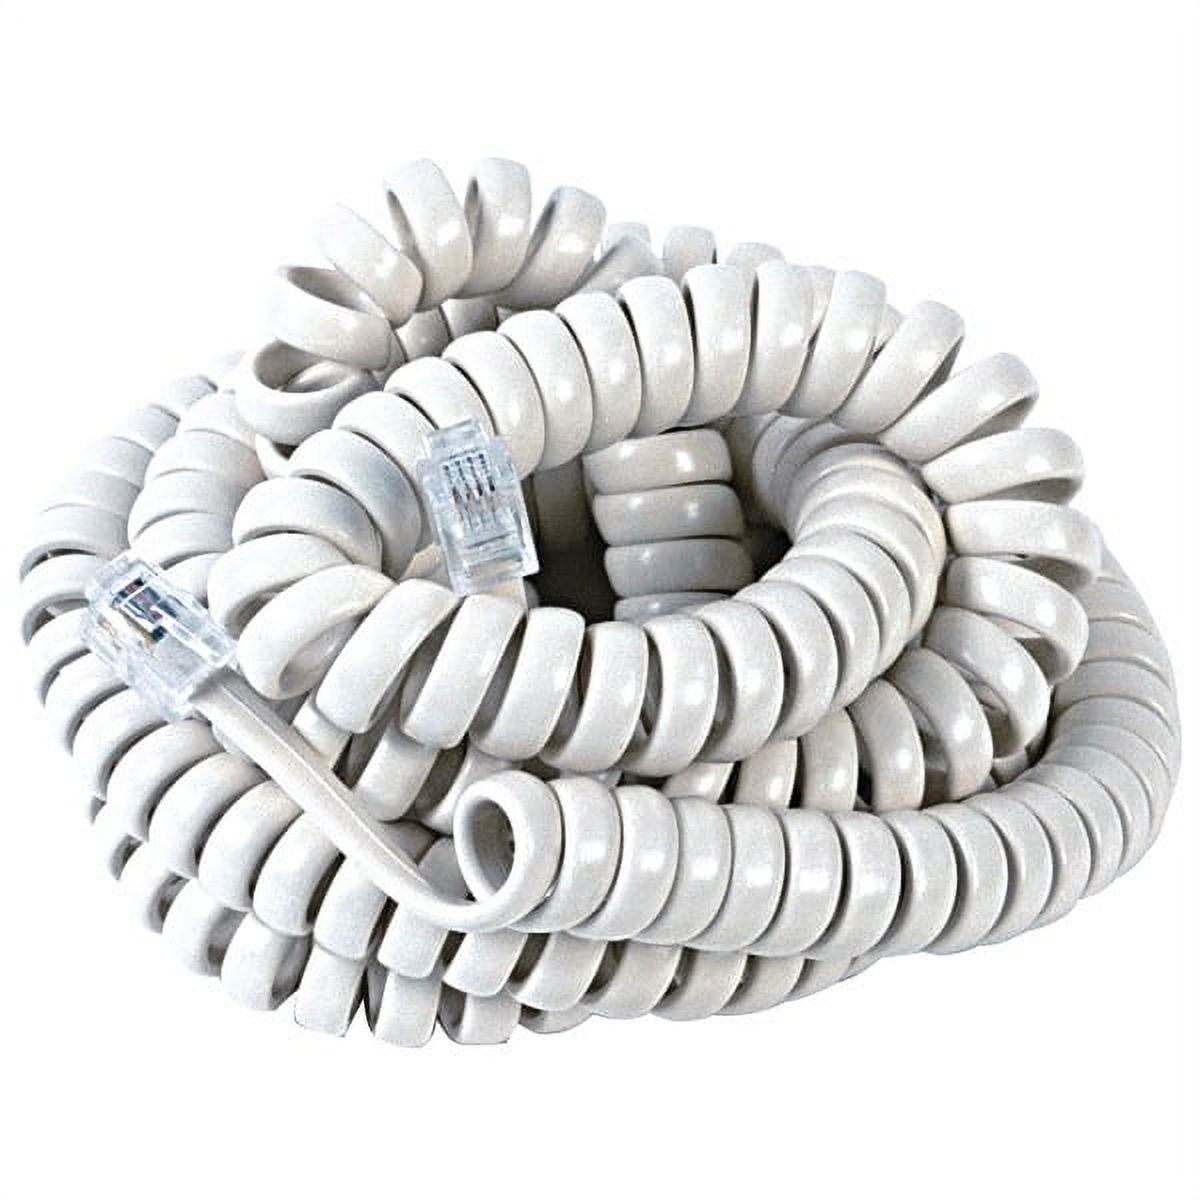 RCA 12 Ft. White Phone Cord TP280WR - image 1 of 2